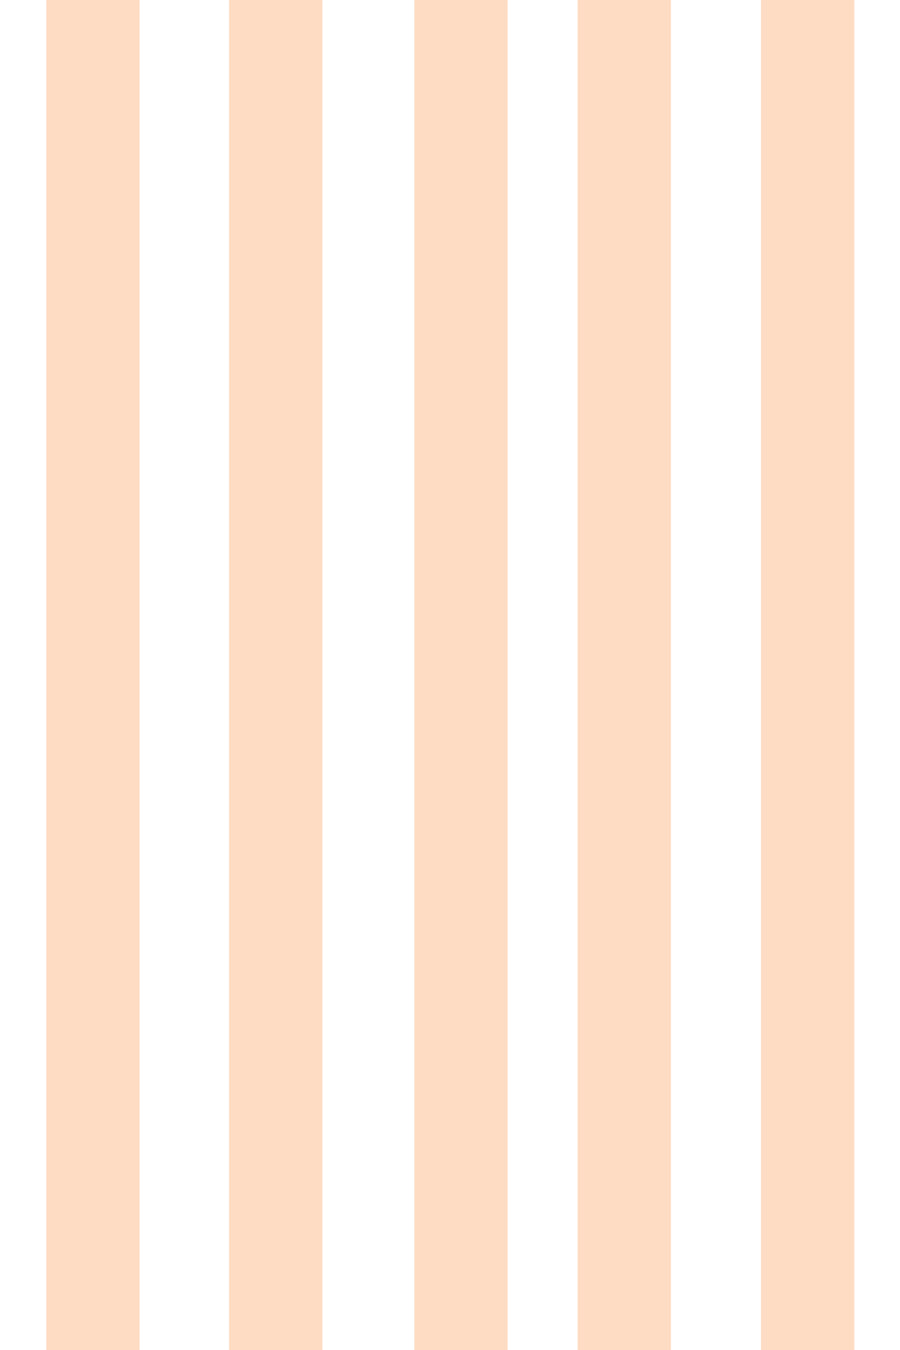 Woolf With Me Fitted Crib Sheet Stripes color_blush